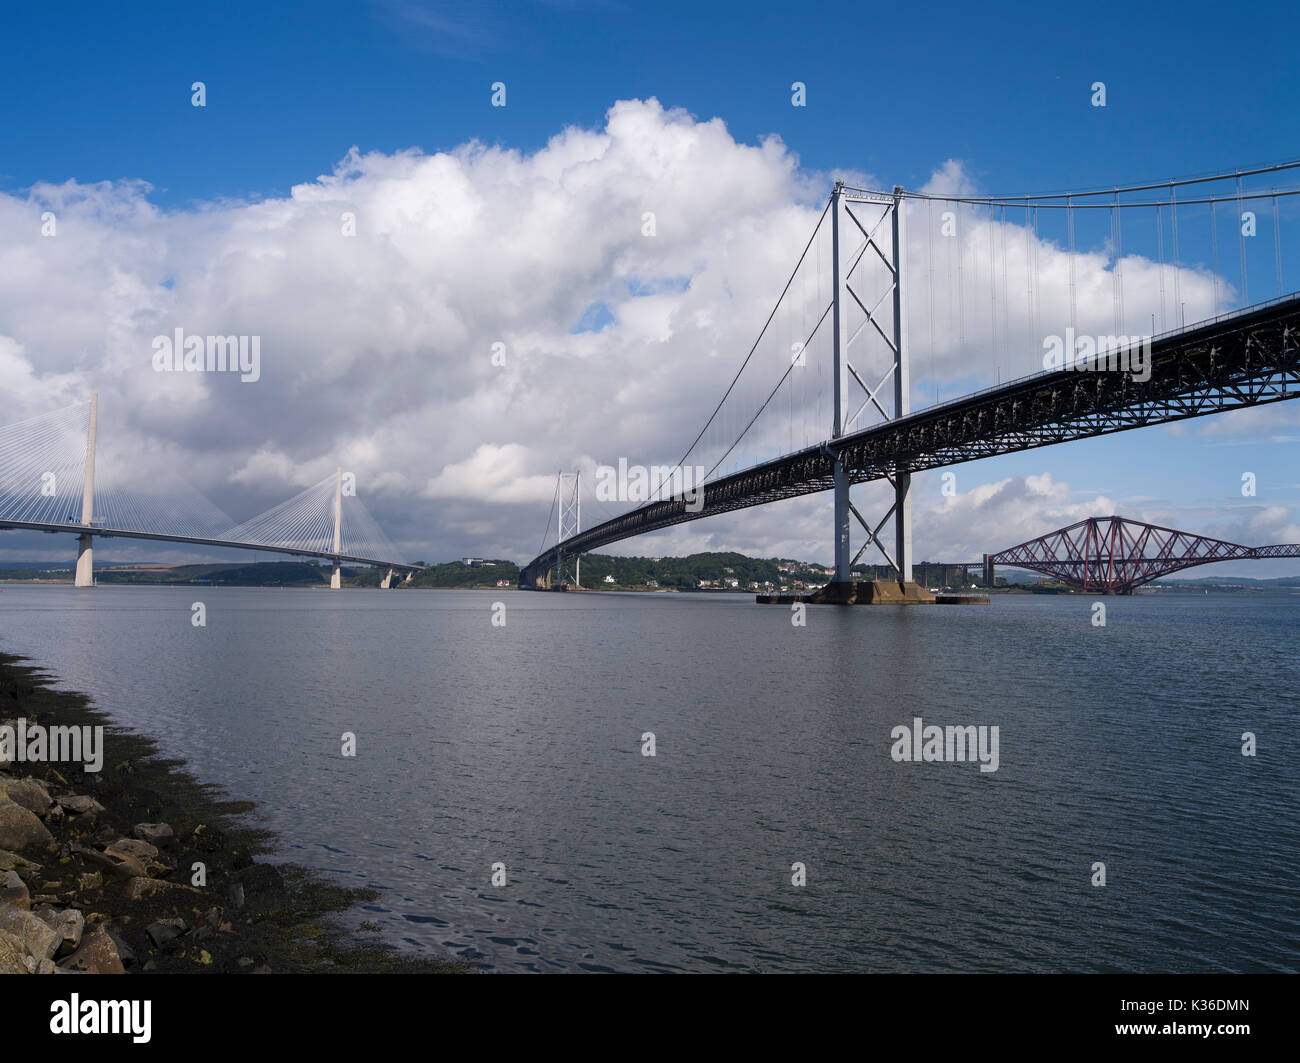 Dh Queensferry Forth Bridge Crossing Trois Firth of Forth Forth Bridges Ecosse pont Banque D'Images